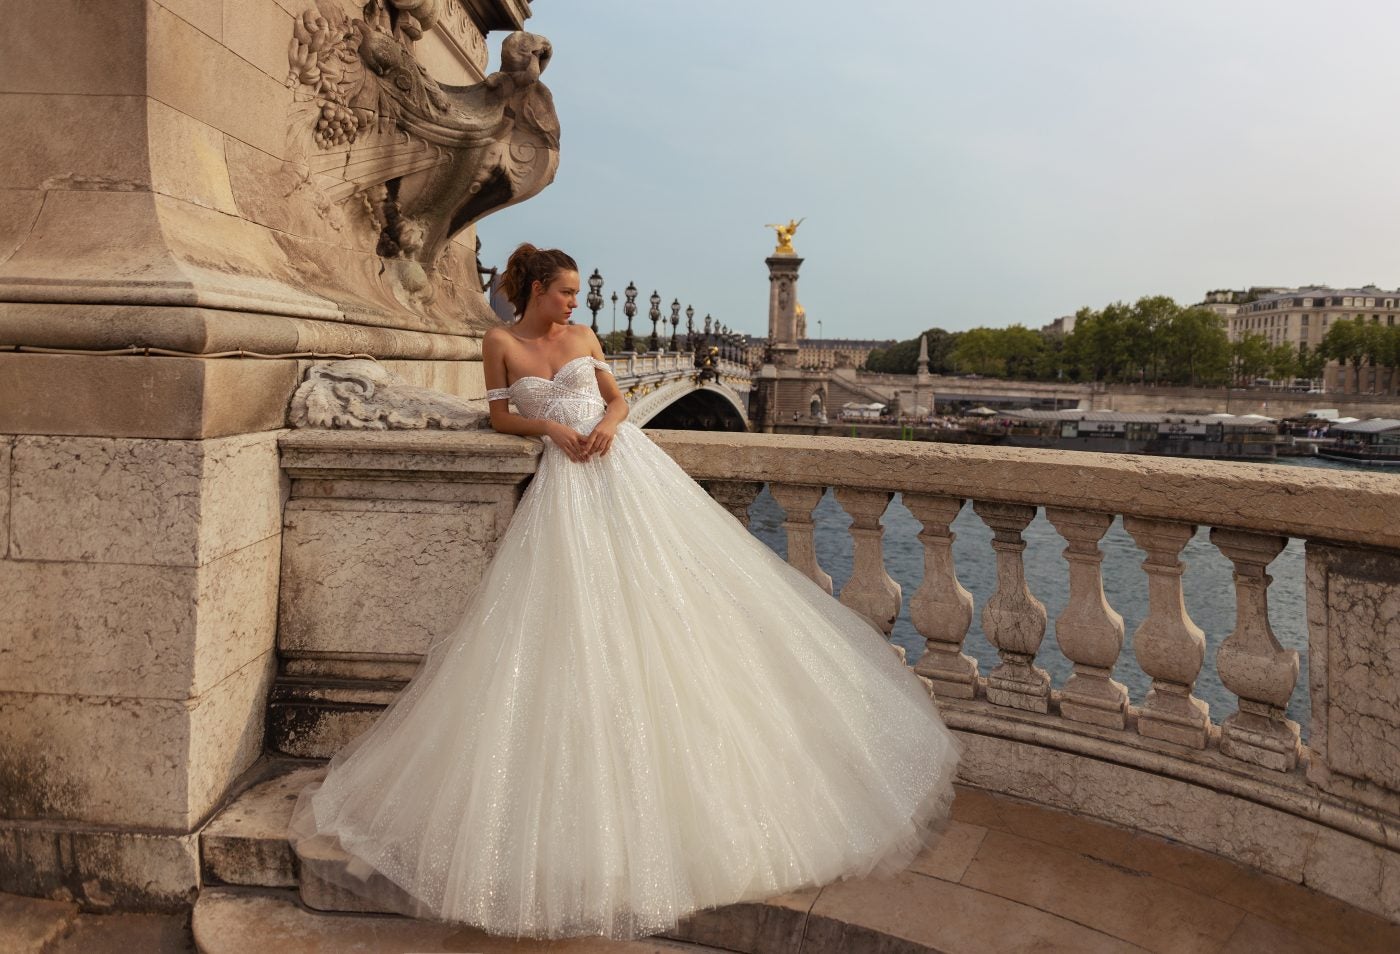 Champagne Wedding Dresses - Largest Selection - Kleinfeld